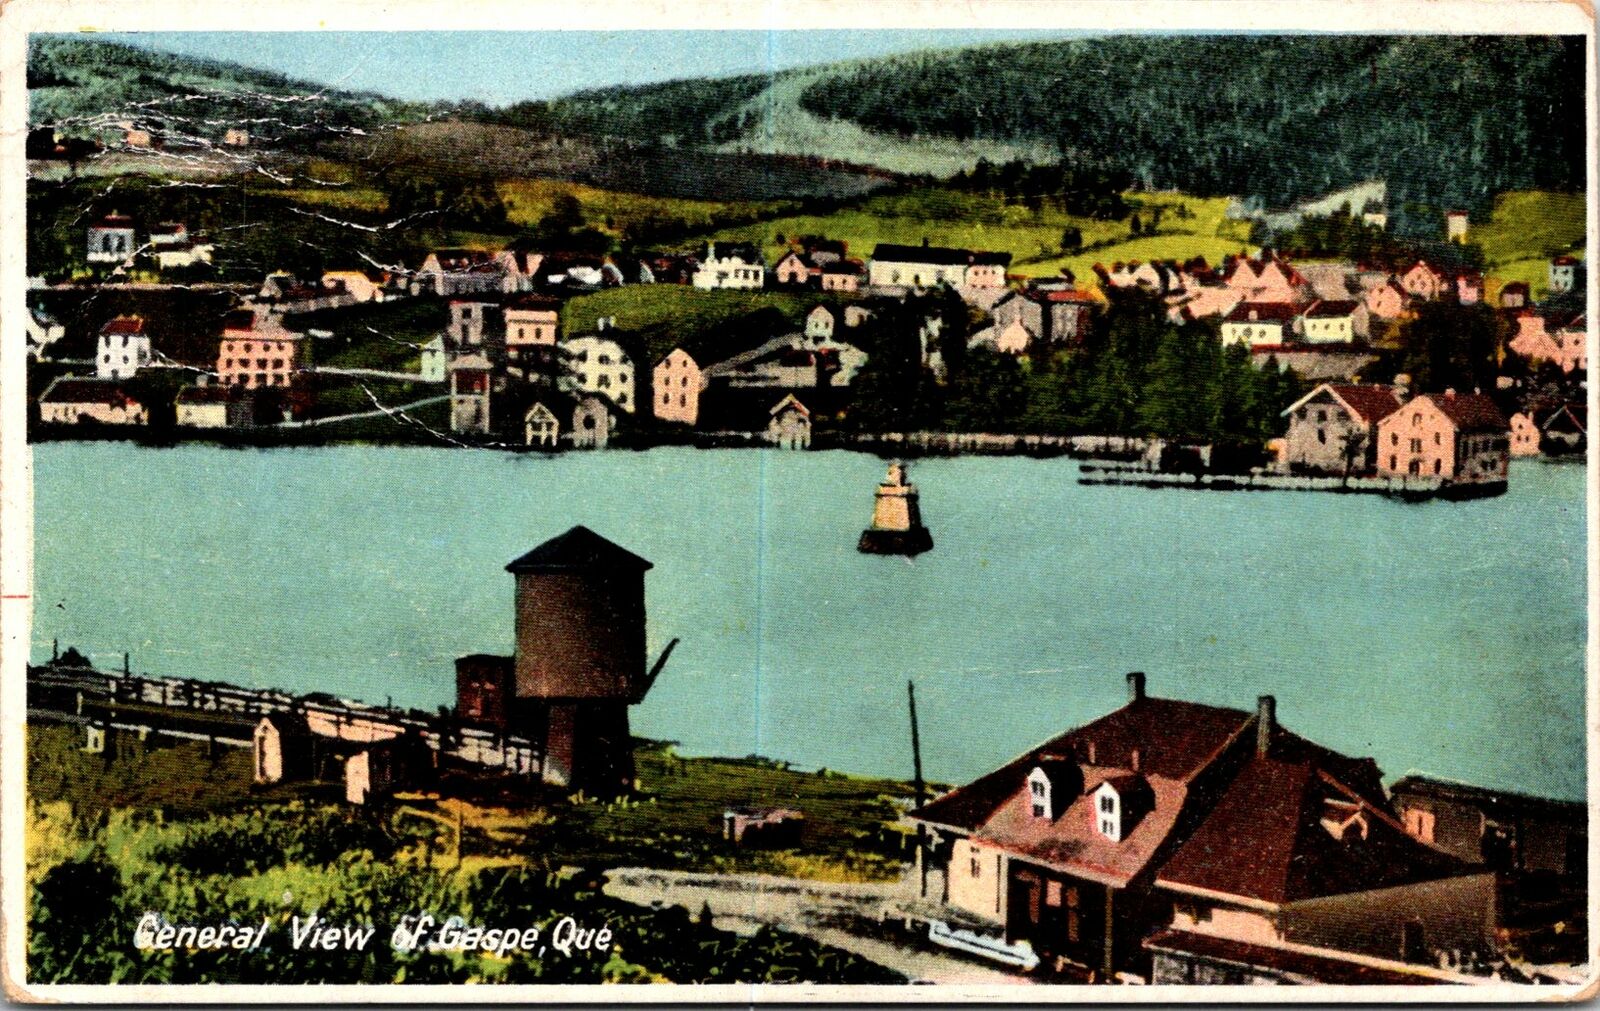 VINTAGE POSTCARD GENERAL VIEW OF THE TOWN OF GASPE QUEBEC AND WATERWAY 1936